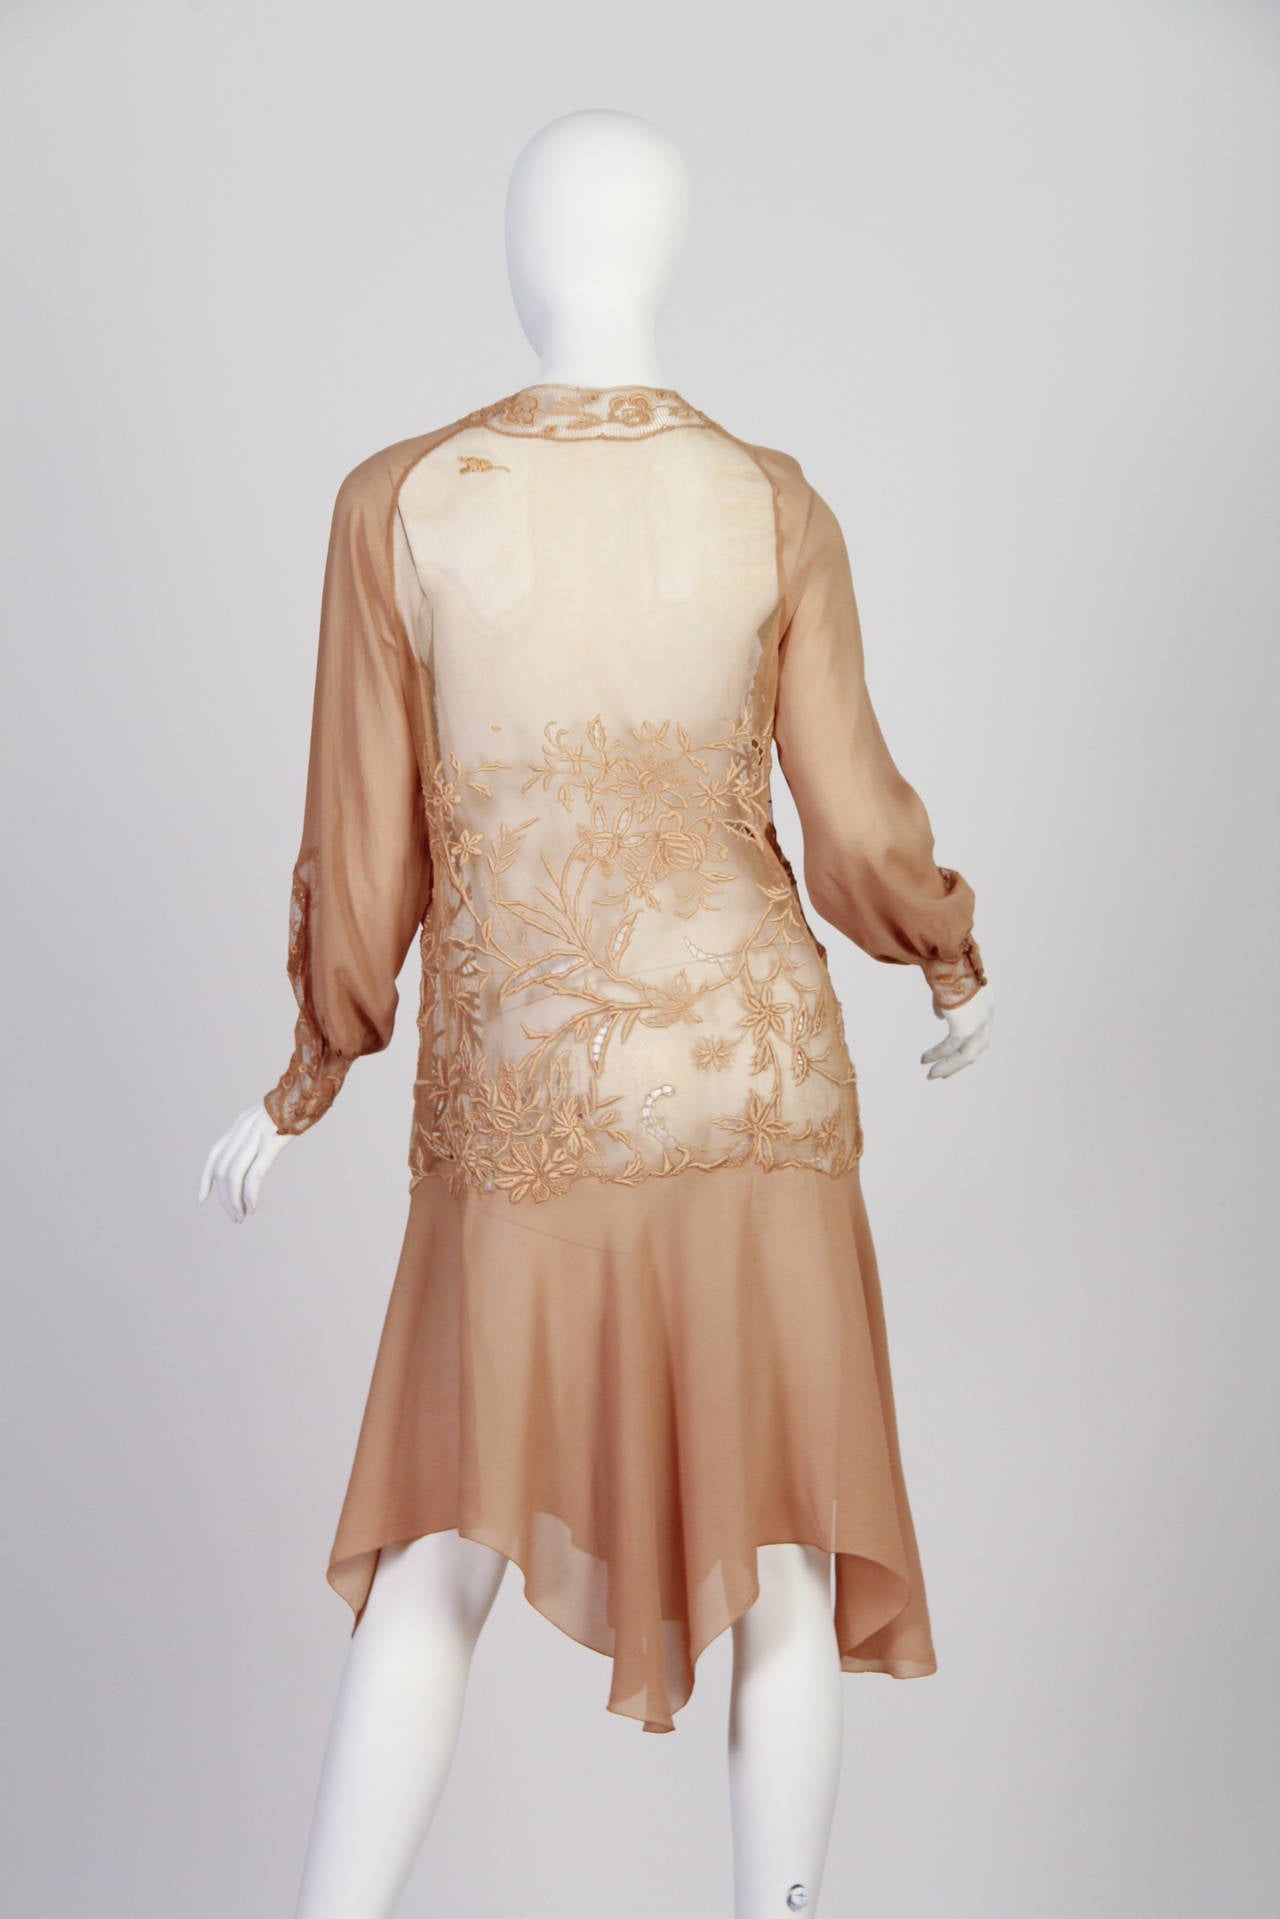 Embroidery of the finest work abounds in the most interesting and inspired of ways in this dress from the mid 1920s. The age was art deco but this dress harkens back to more romantic of times. The body of the dress is made from very fine net which